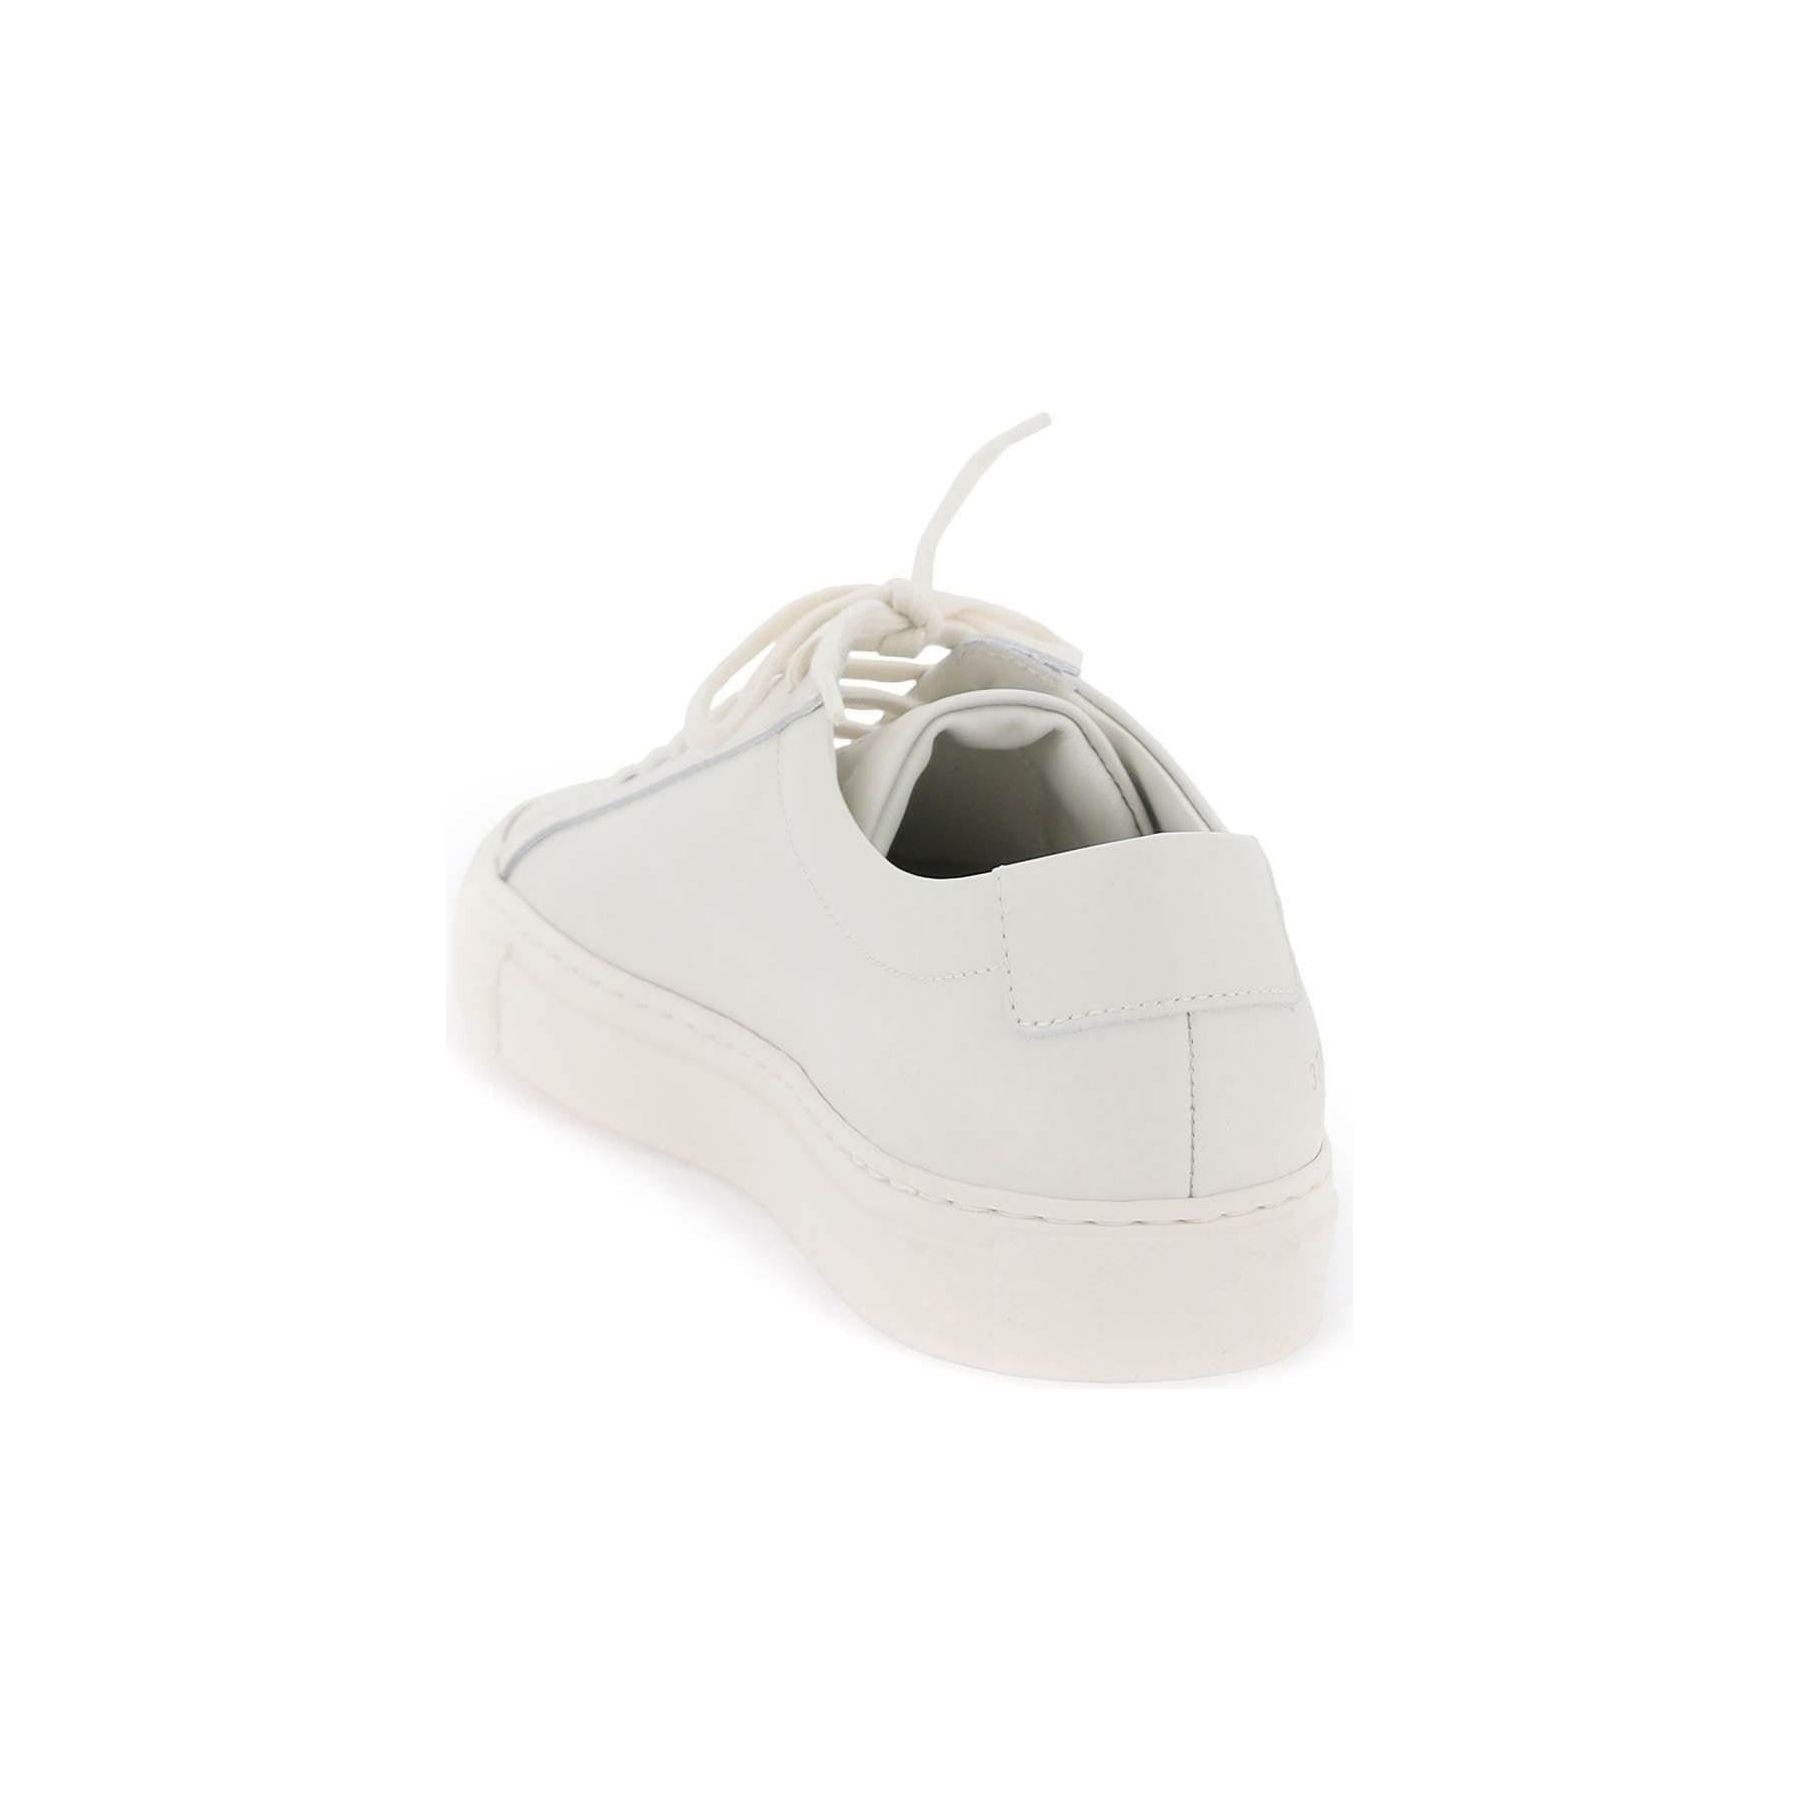 Warm White Original Achilles Low-Top Leather Sneakers COMMON PROJECTS JOHN JULIA.